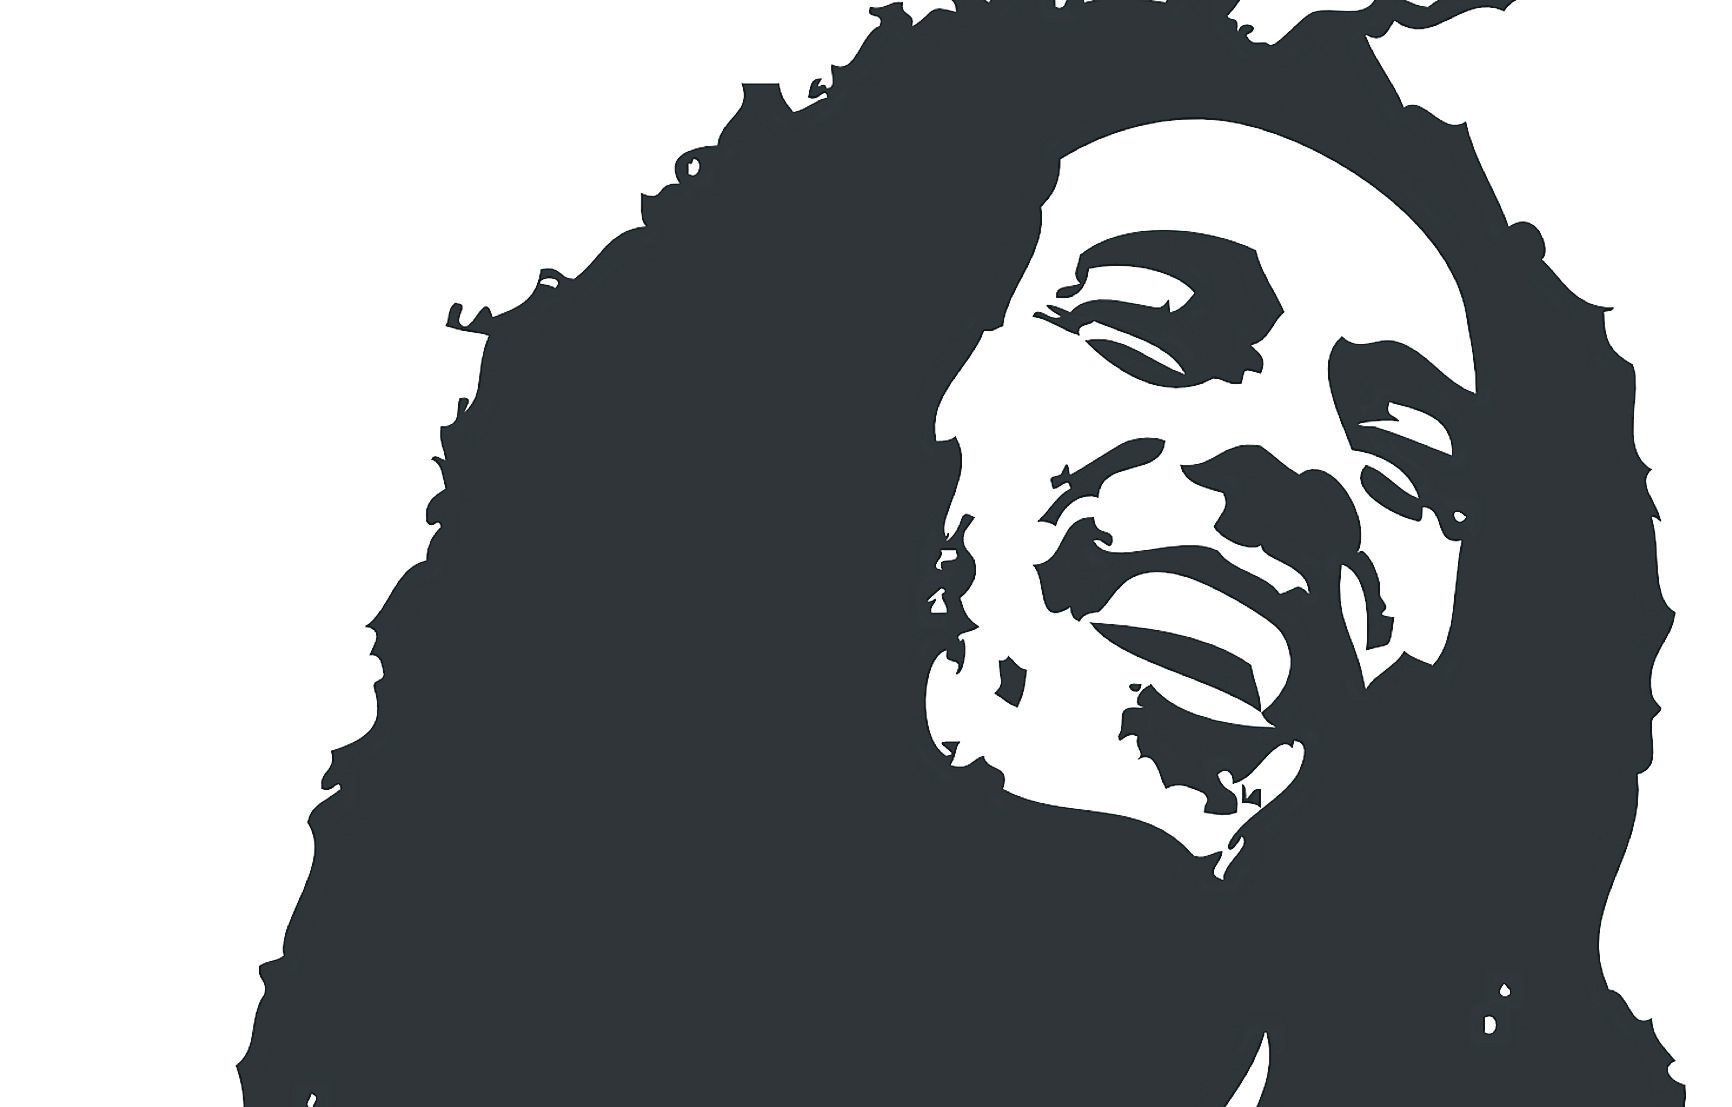 Mid-February Events: Keep on moving at the Bob Marley Birthday Celebration